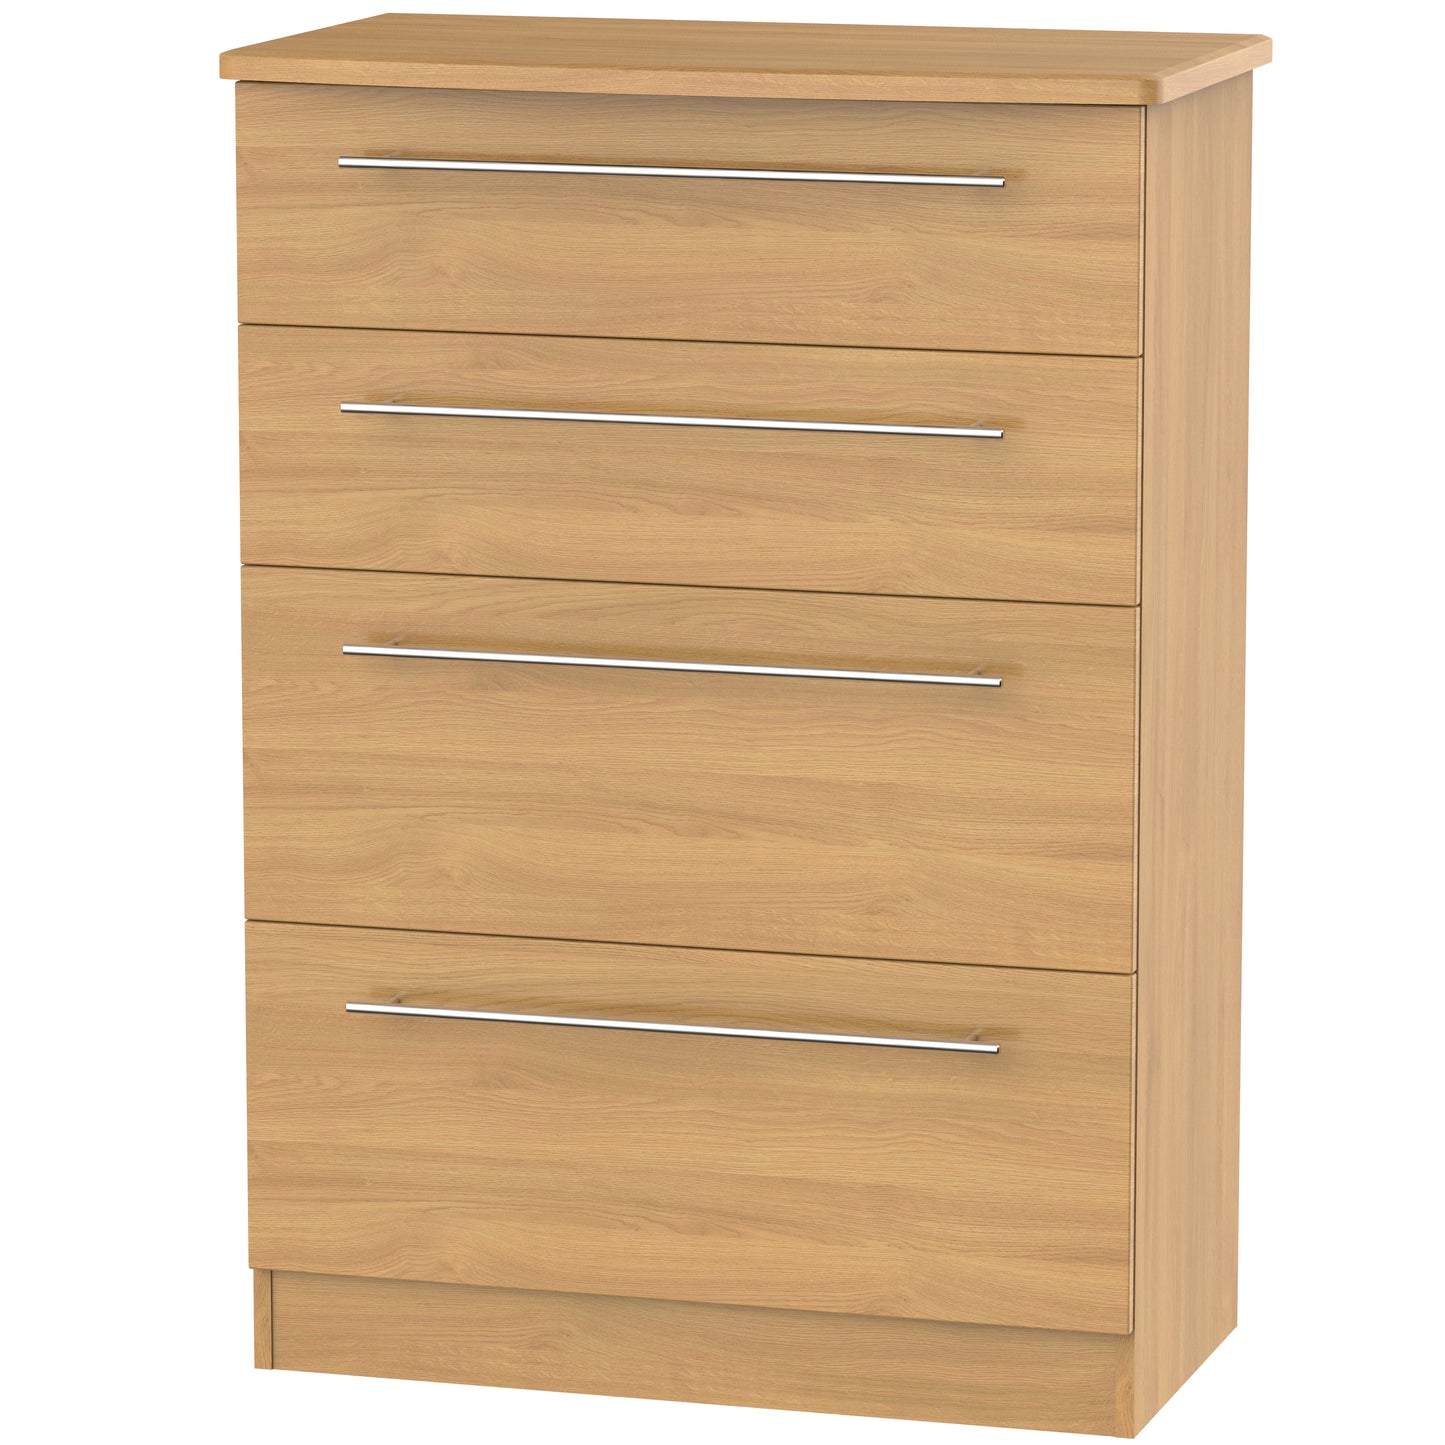 Sherwood 4 Drawer Deep Chest Fully assembled